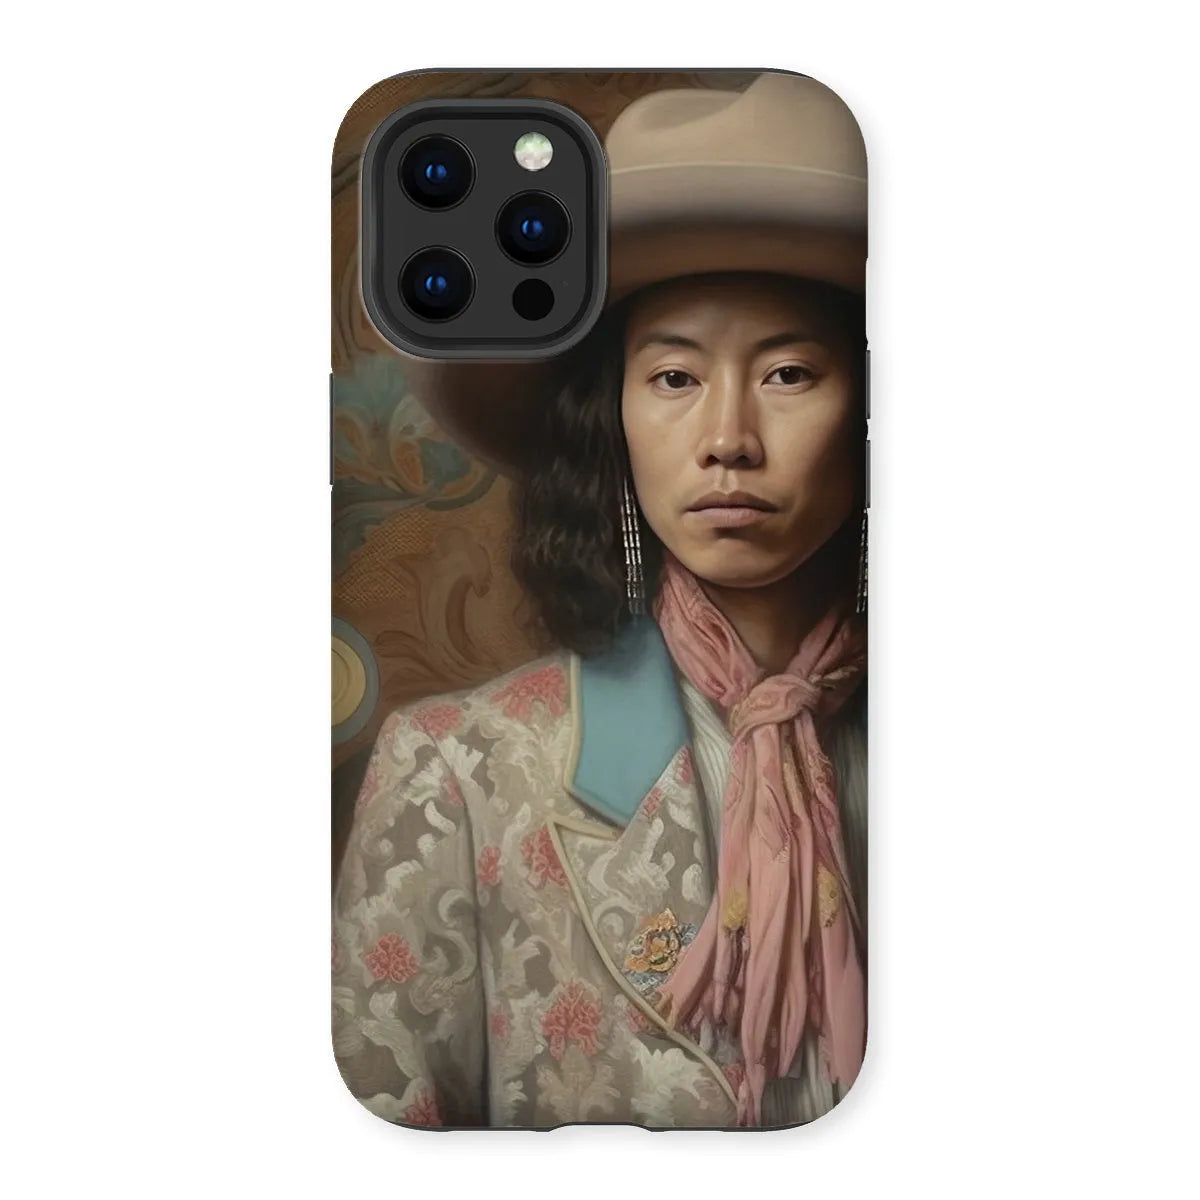 Dorjee The Gay Cowboy - Dandy Gay Aesthetic Art Phone Case - Iphone 12 Pro Max / Matte - Mobile Phone Cases - Aesthetic